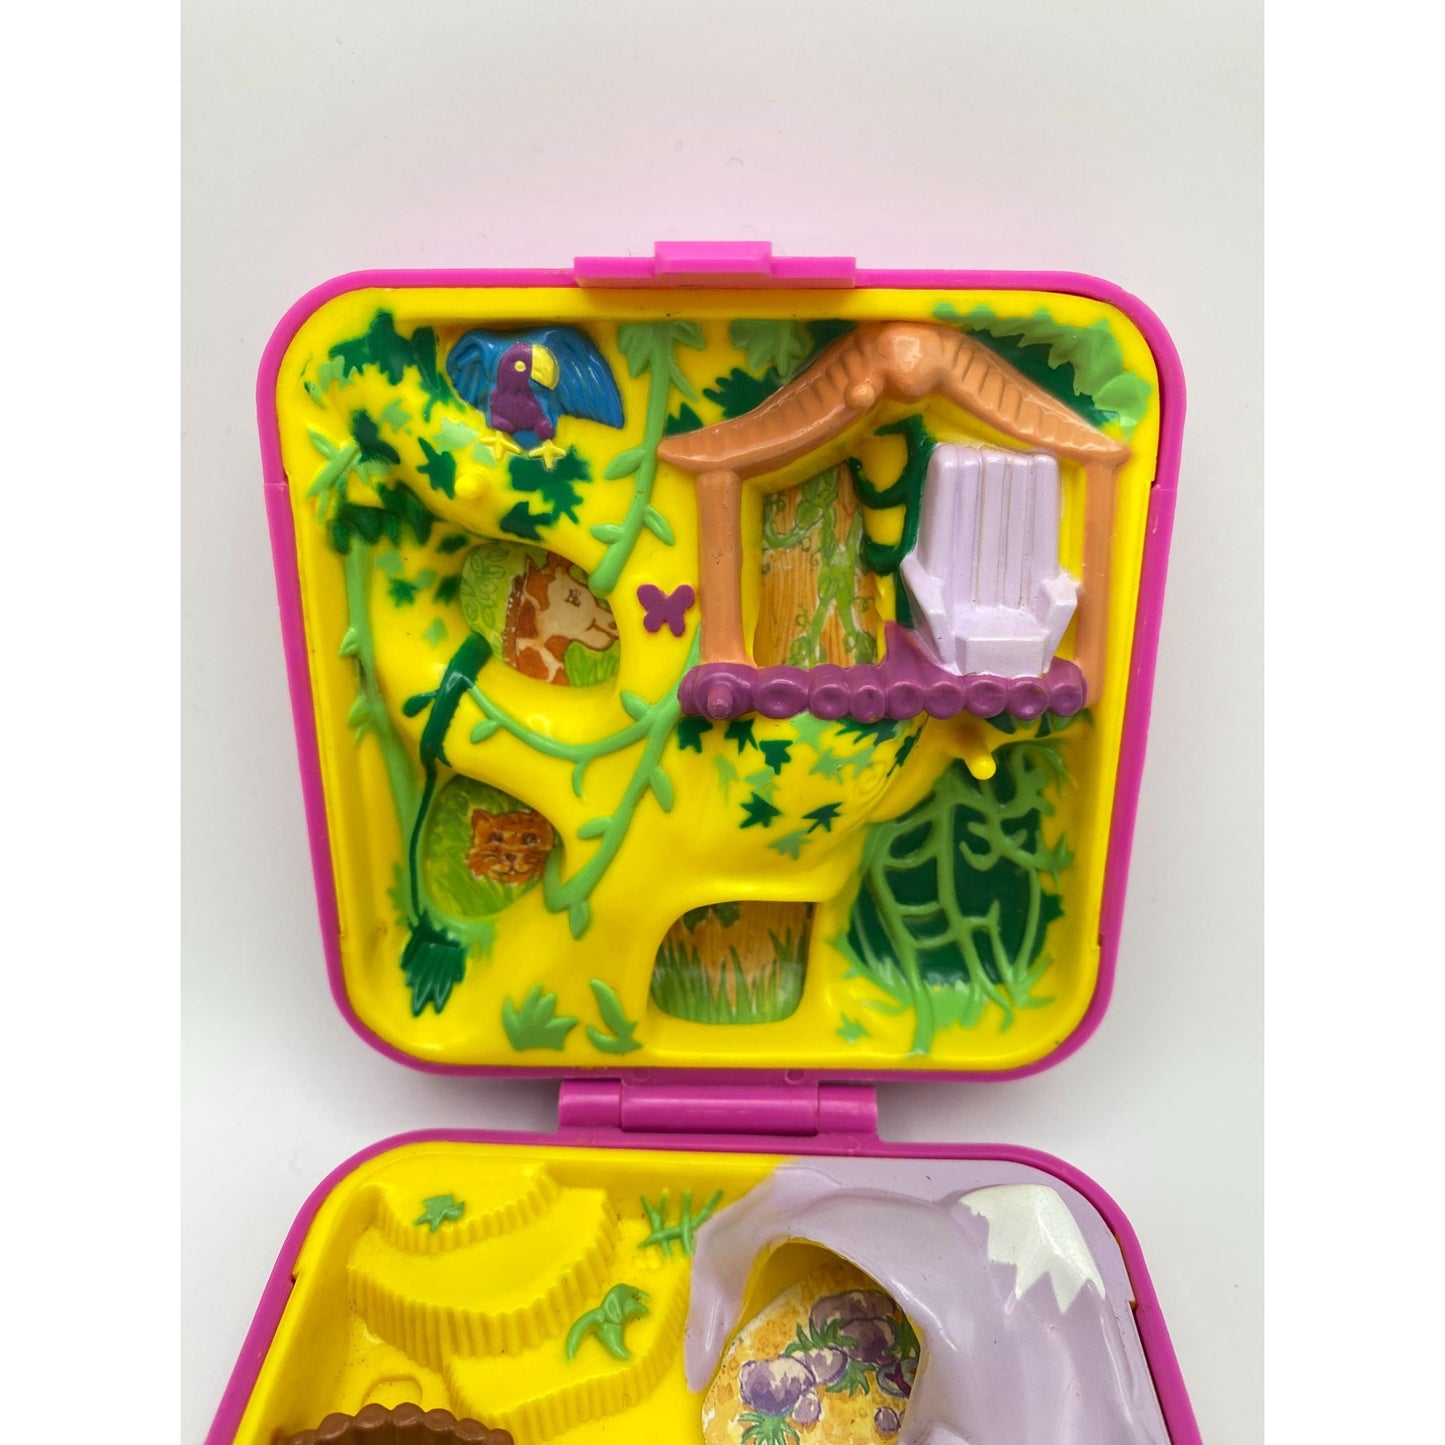 1989 Polly Pocket Wild Zoo World Compact ONLY